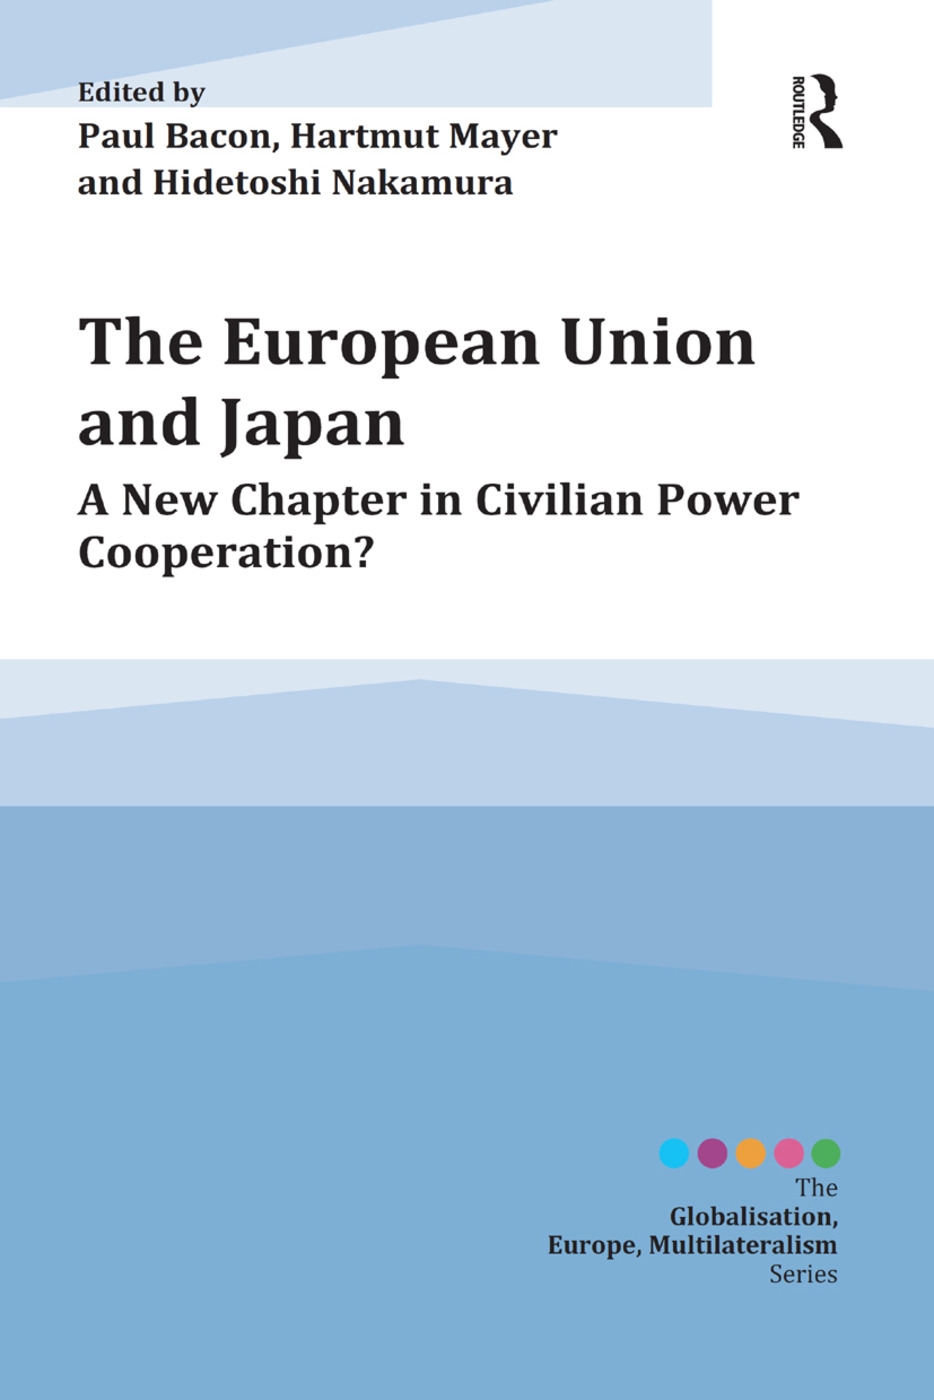 The European Union and Japan: A New Chapter in Civilian Power Cooperation? / Edited by Paul Bacon, Hartmut Mayer and Hidetoshi Nakamura